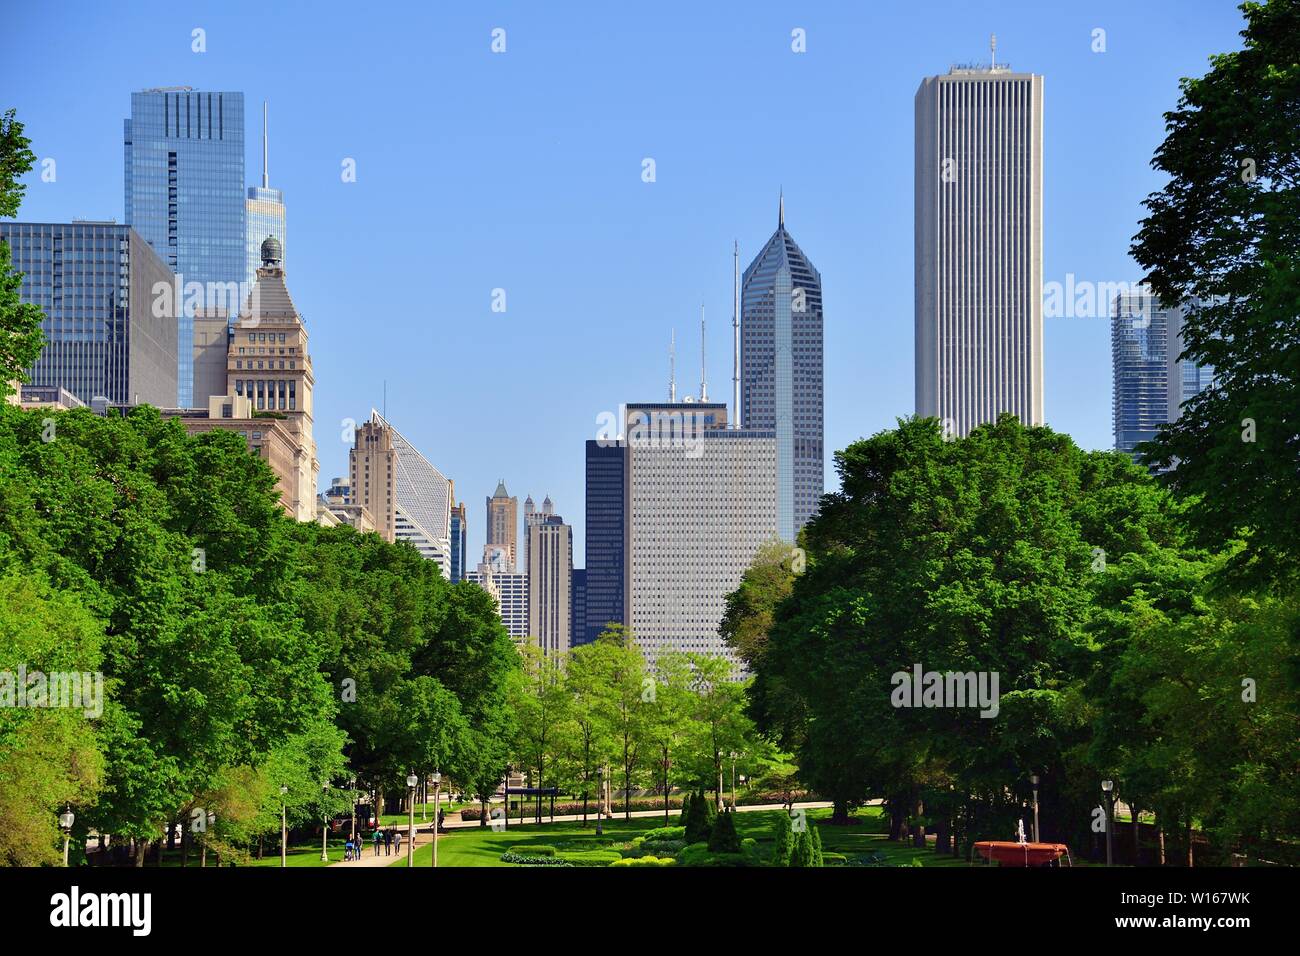 Chicago, Illinois, USA. A portion of the city skyline rises above the venerable facades of buildings along Michigan Avenue at far left. Stock Photo